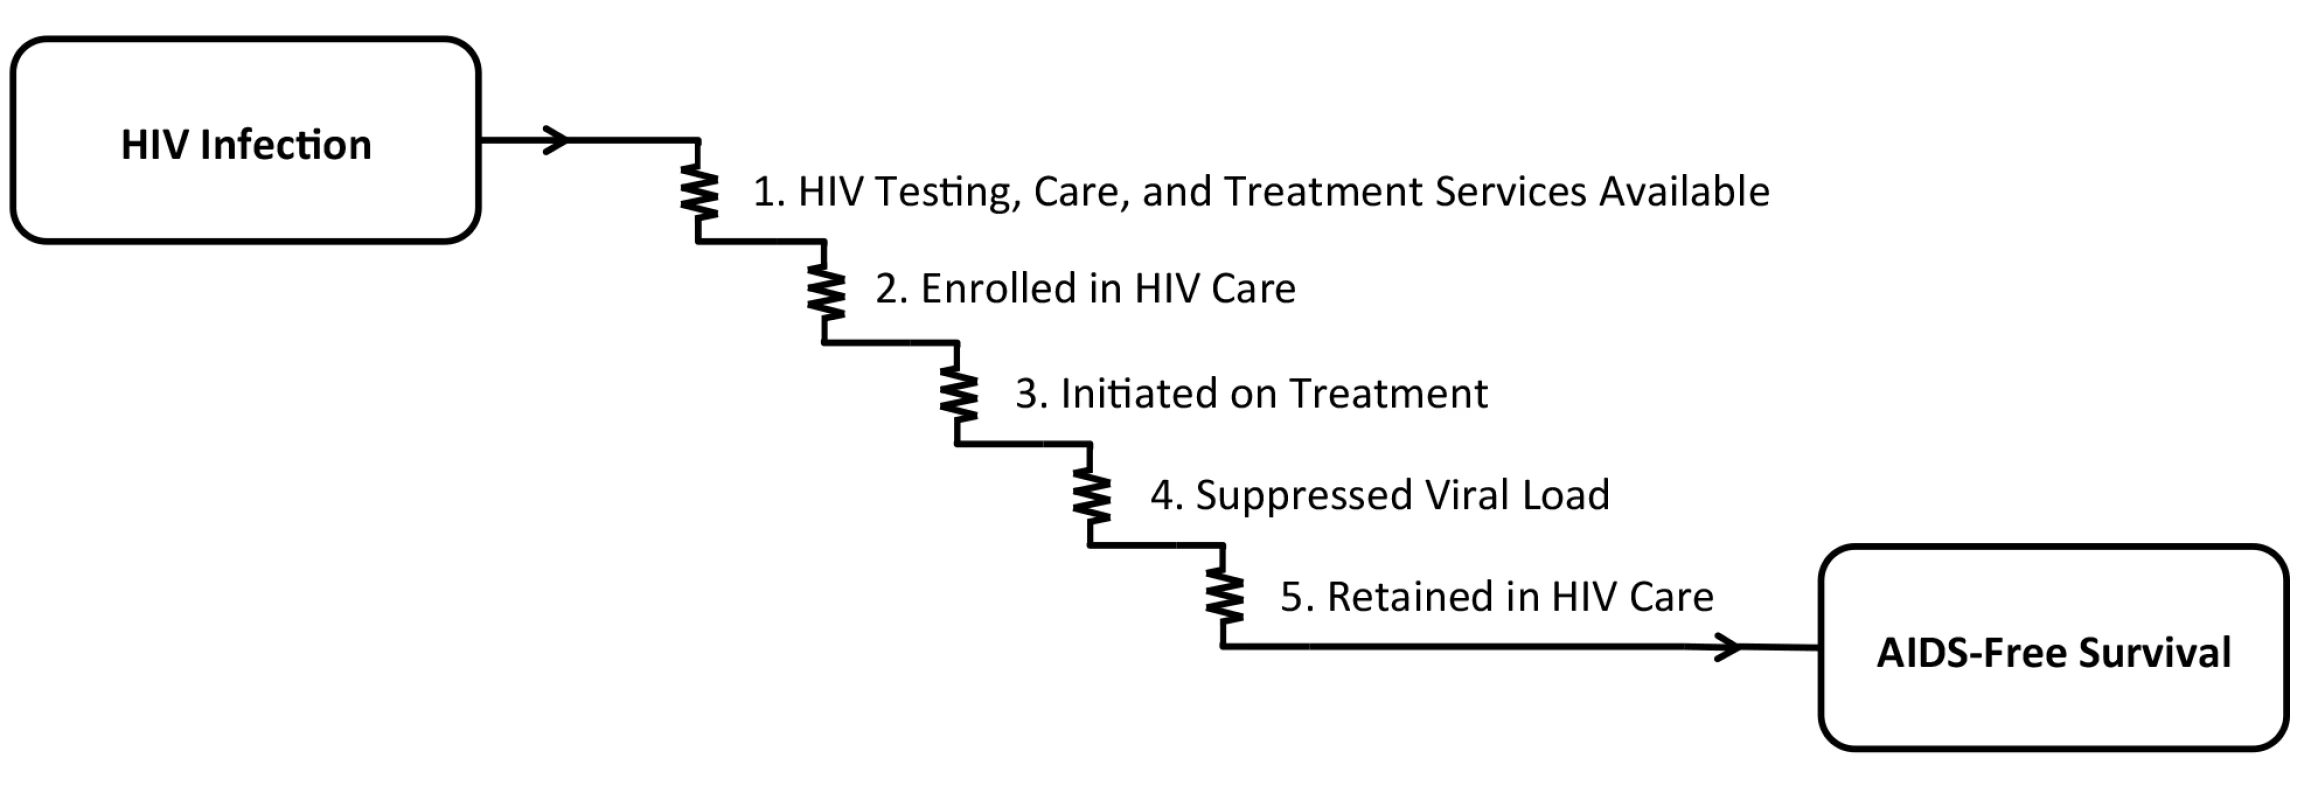 The cascade of “voltage drops” from HIV infection to AIDS-free survival.